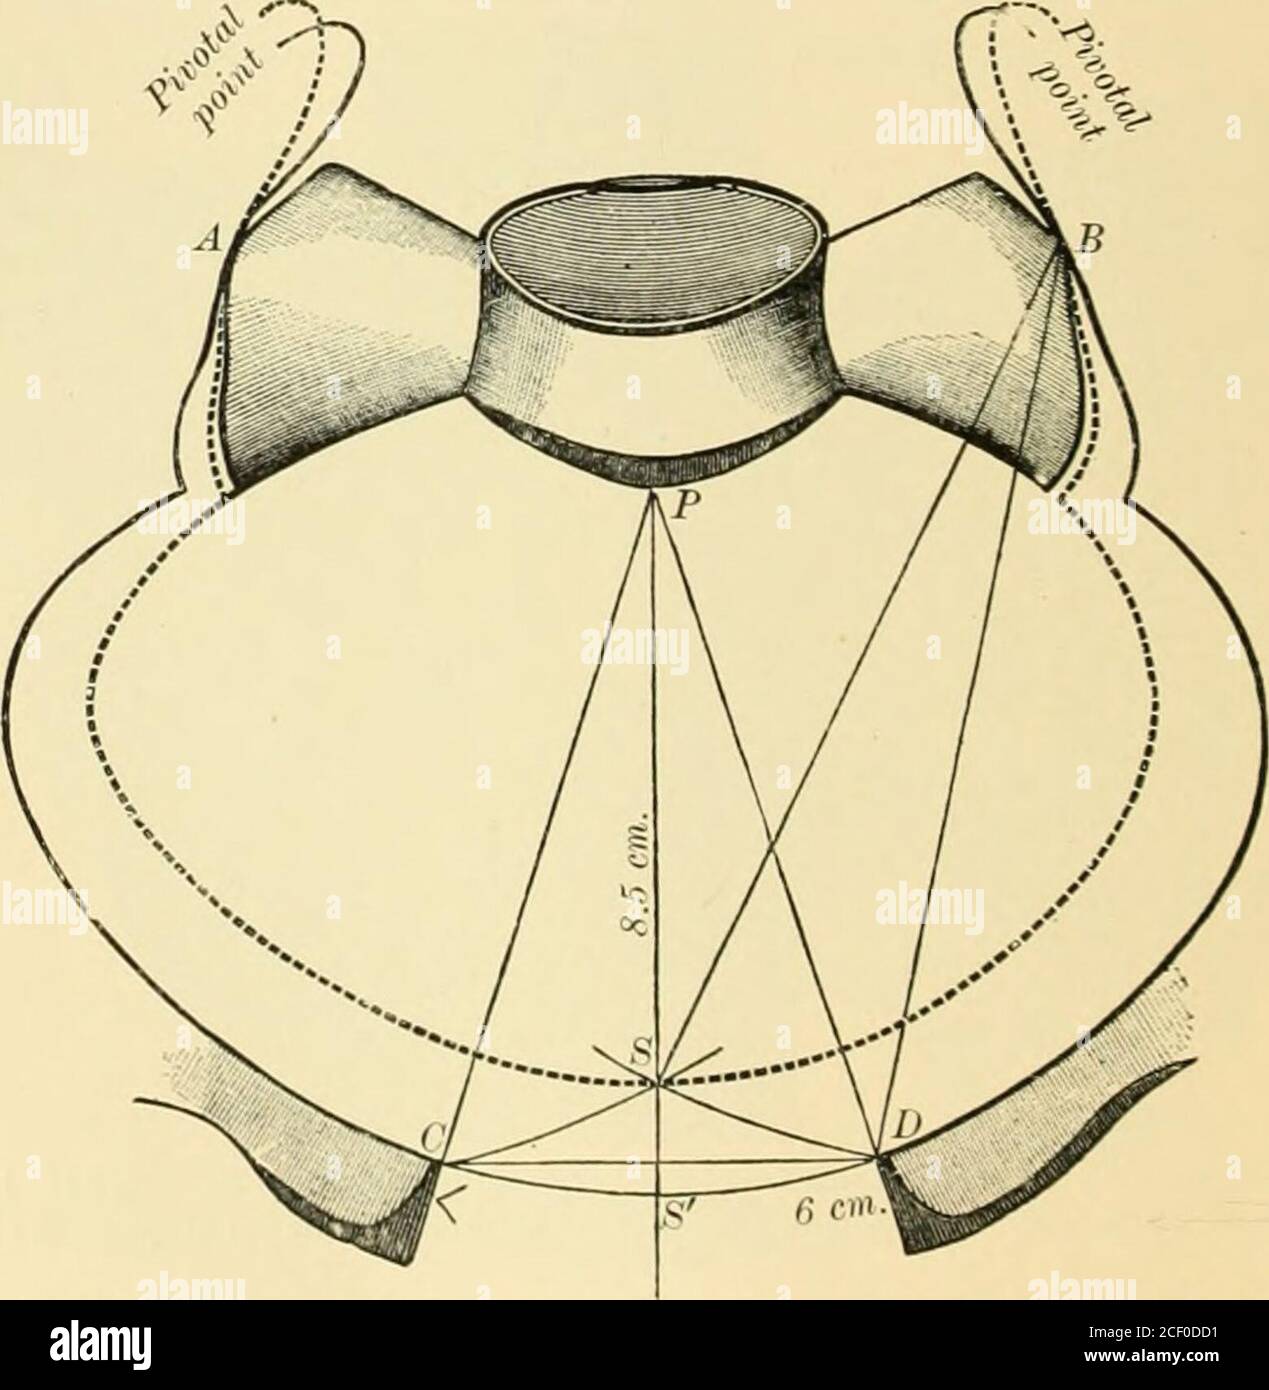 . An American text-book of obstetrics. For practitioners and students. Fig. 505.—The effect of descent of the pubic bones on the gain in length of sacro-pubic diameter. Bymere separation of bones, the gain in conjugata vera would be S S; with added effect of descent it isS, S (Wehle). lines running from the promontory to the anterior half of the linea ilio-pectineaare elongated more than by mere separation of the pubic bones. But this is. Fig. 506.—Diagram of pelvic brim, showing gain in space on opening pubic joint: PS, conjugate jointclosed; PS, conjugate joint open 6 cm. (Wehle). not all. A Stock Photo